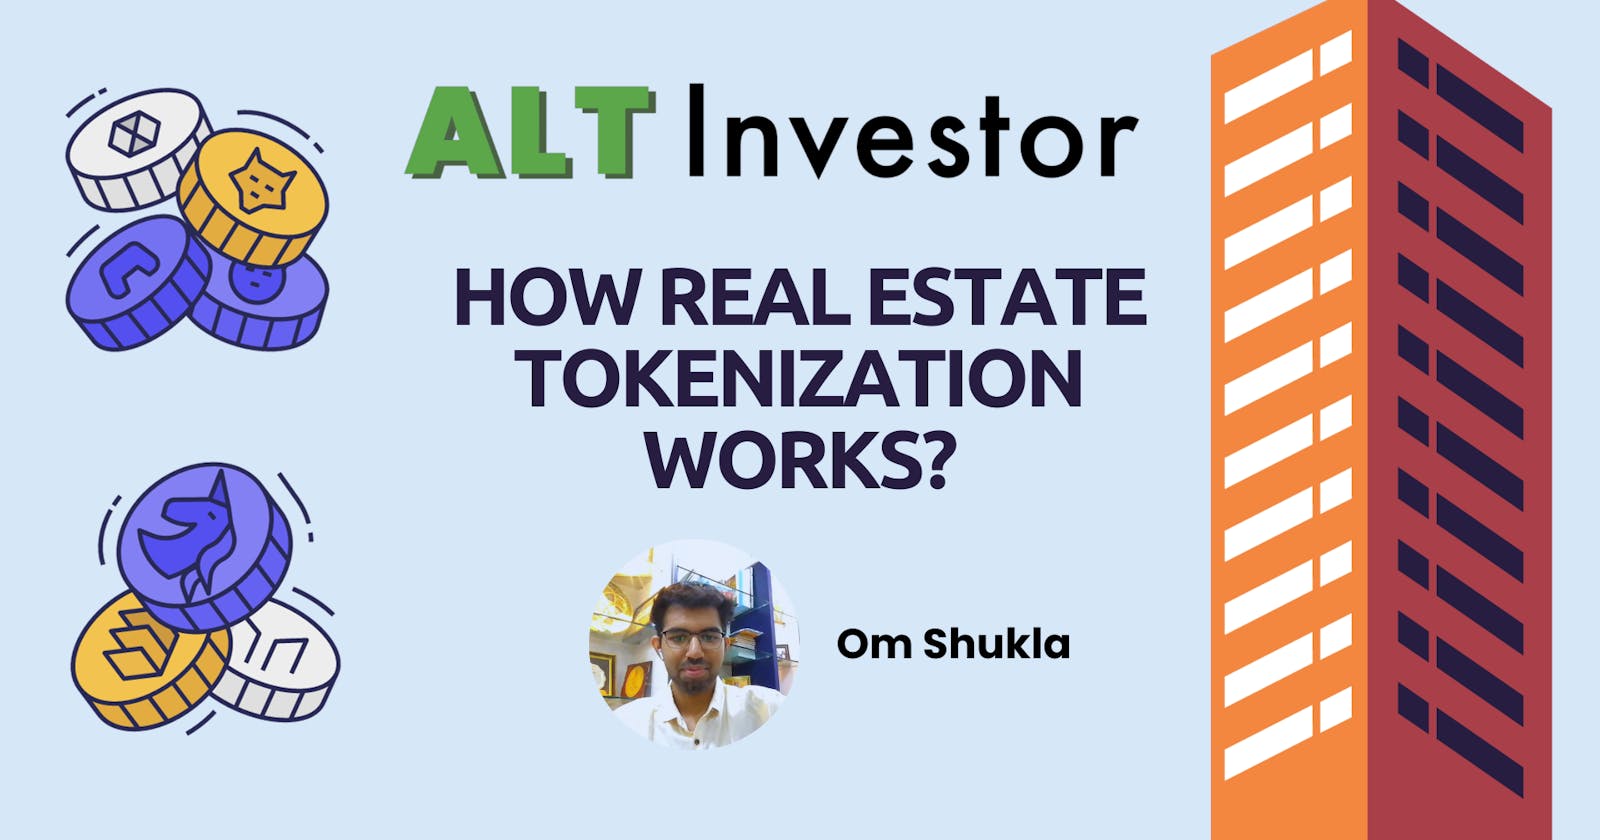 Tokenized Real Estate: A Genuine Investment Opportunity or Just a Gimmick?